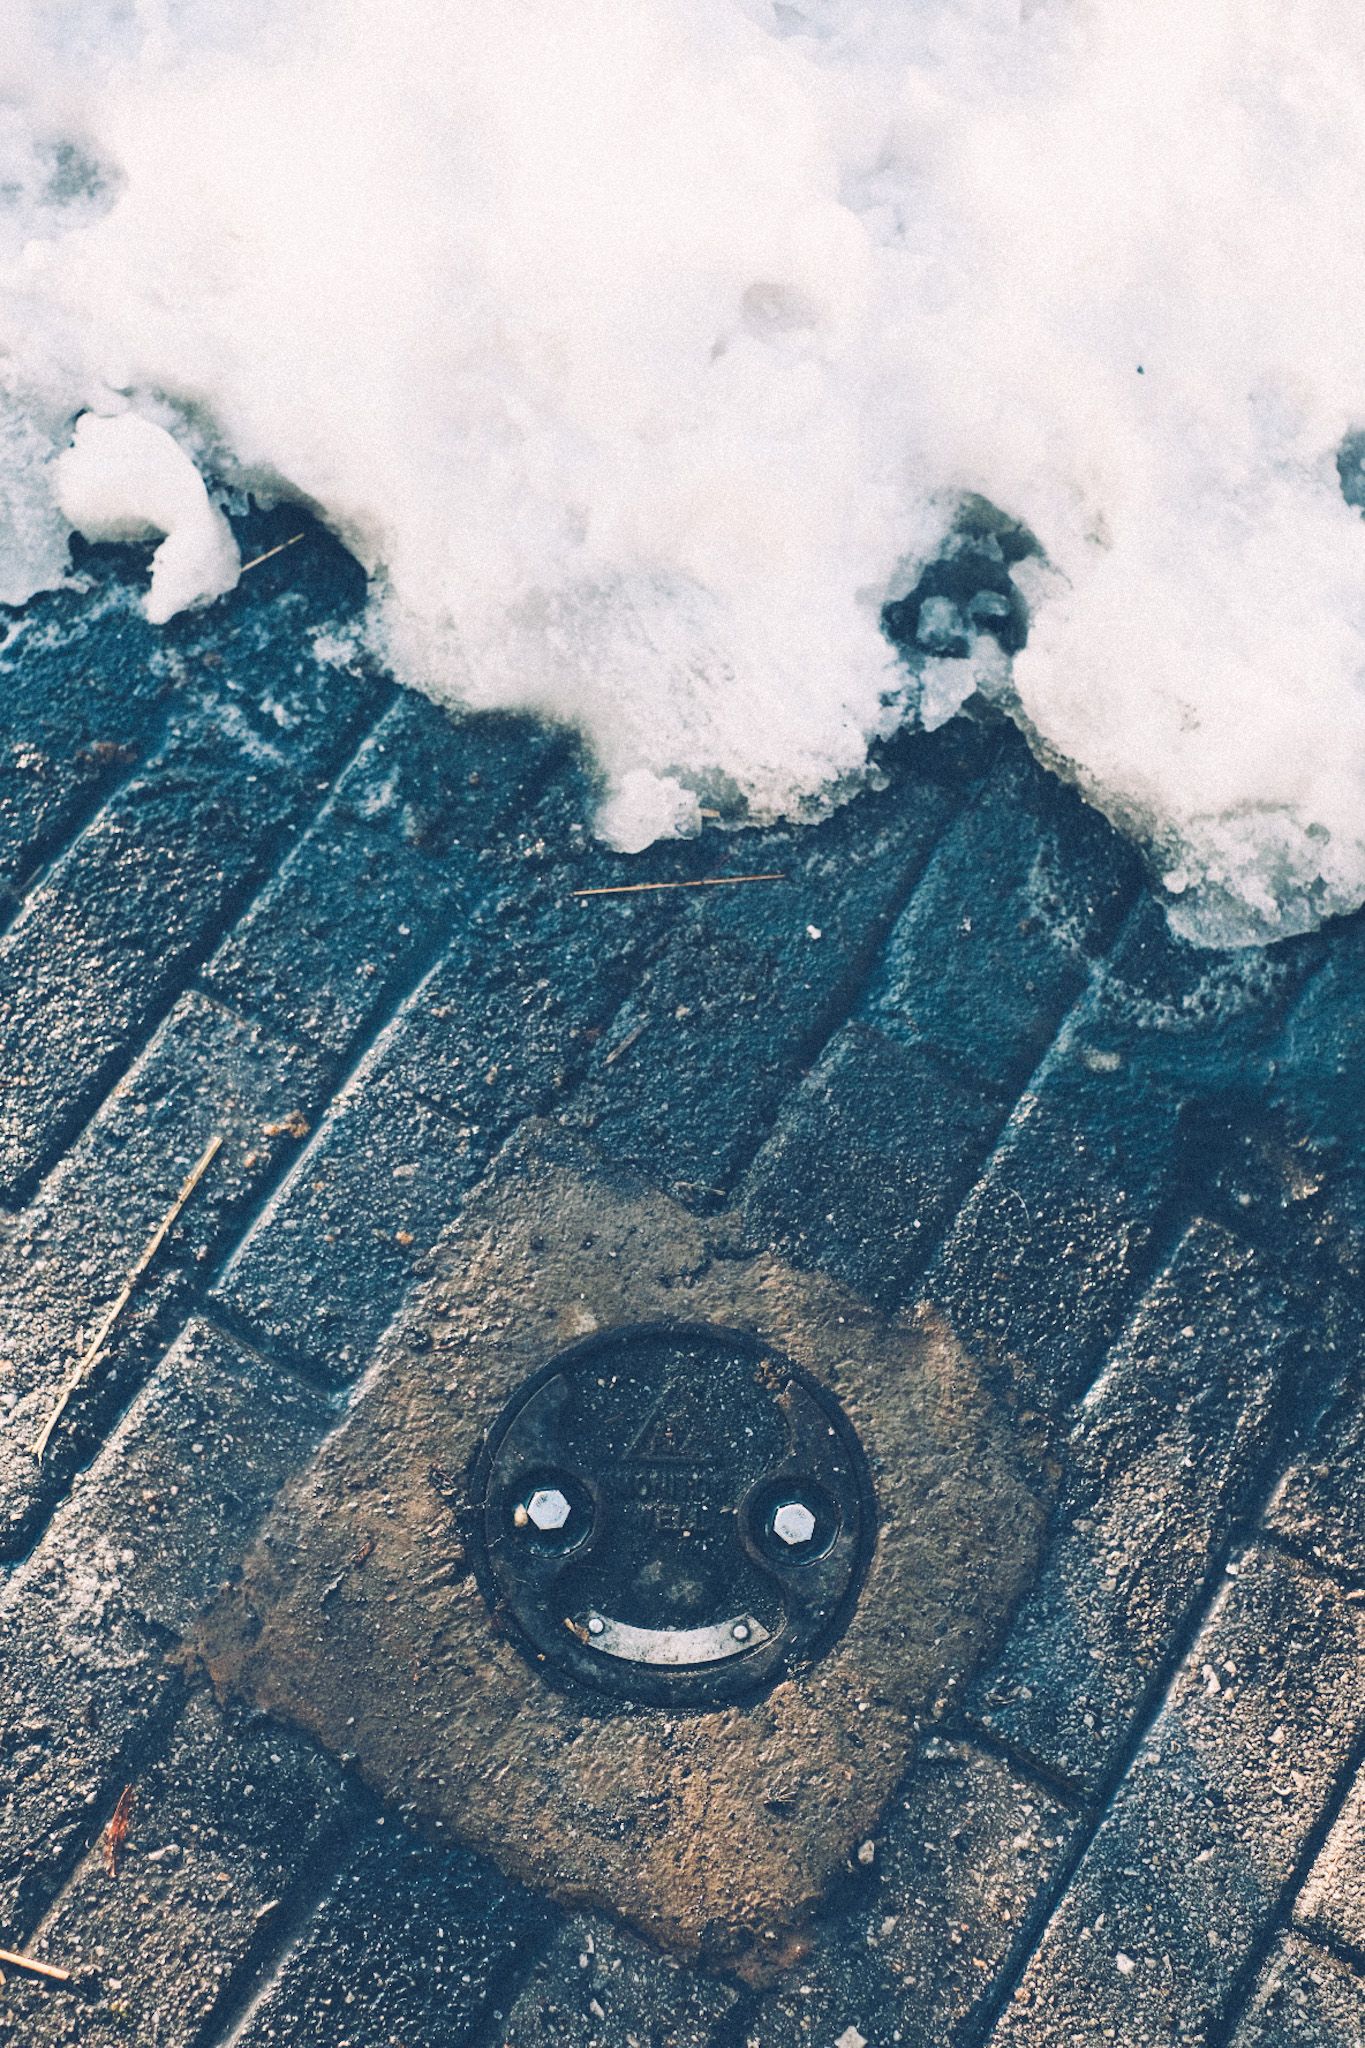 A small manhole-like covering on a brick pathway looks like a smiley face on a wet, sunny day. Snow covers the top half of the frame.